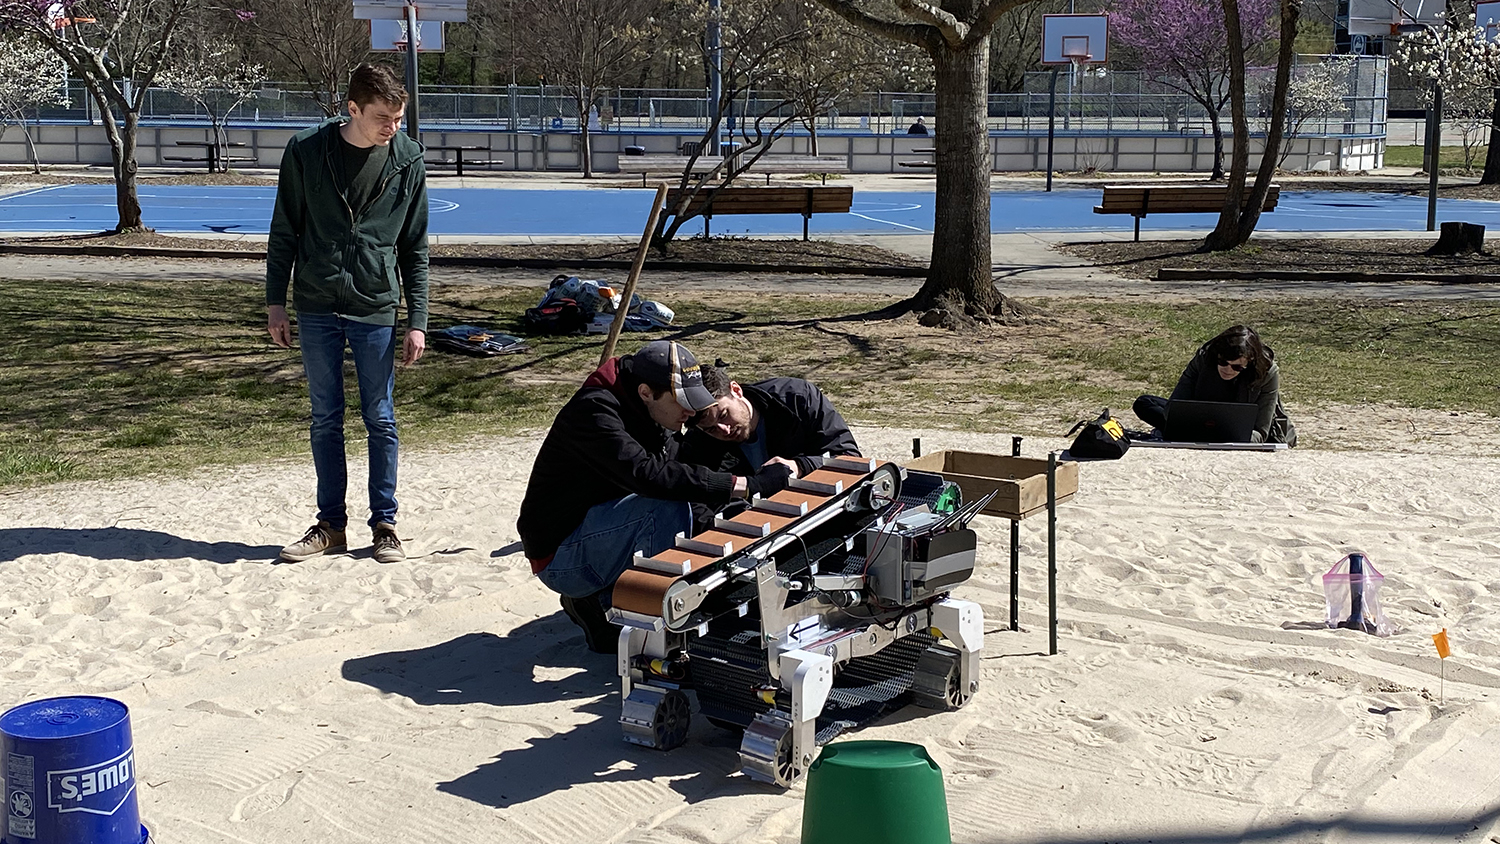 NC State mechatronics students work on a robot while outdoors in a sandlot.